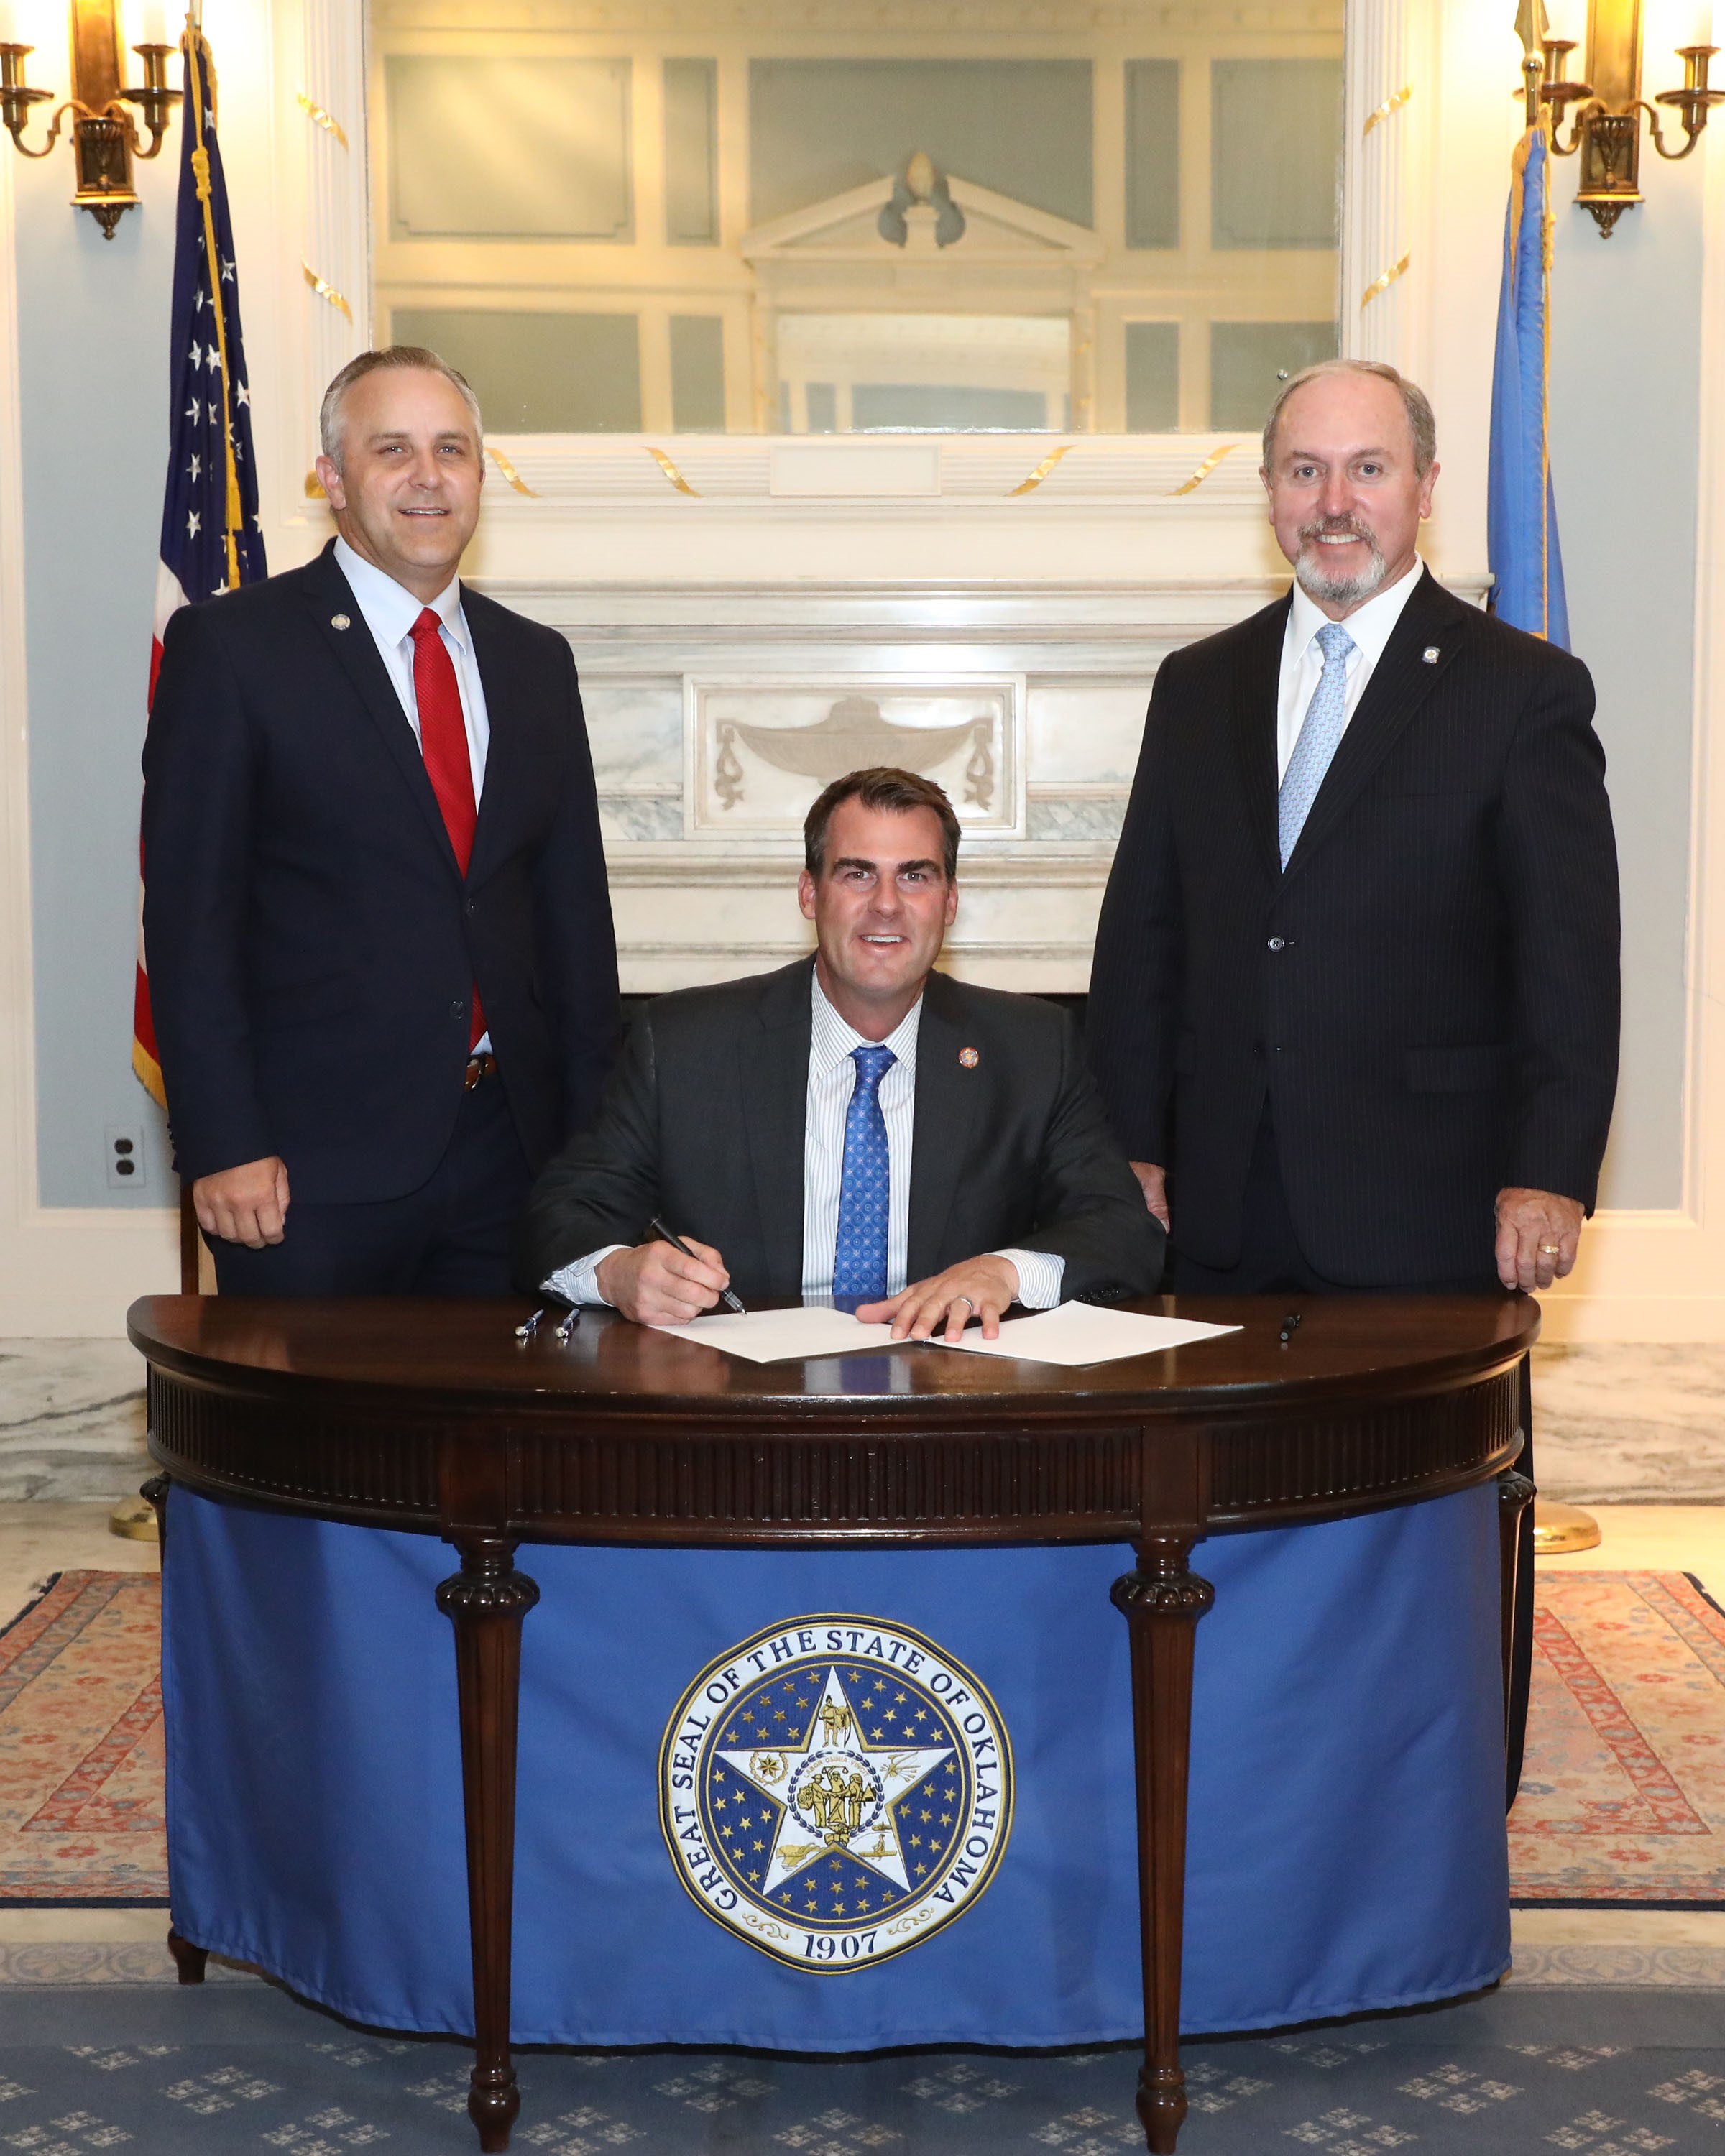 Senate President Pro Tempore Greg Treat, R-Oklahoma City, Gov. Kevin Stitt and Sen. Marty Quinn, R-Claremore, held a ceremonial bill signing at the state Capitol for Senate Bill 441 which is aimed at encouraging districts to return to a five-day school week.